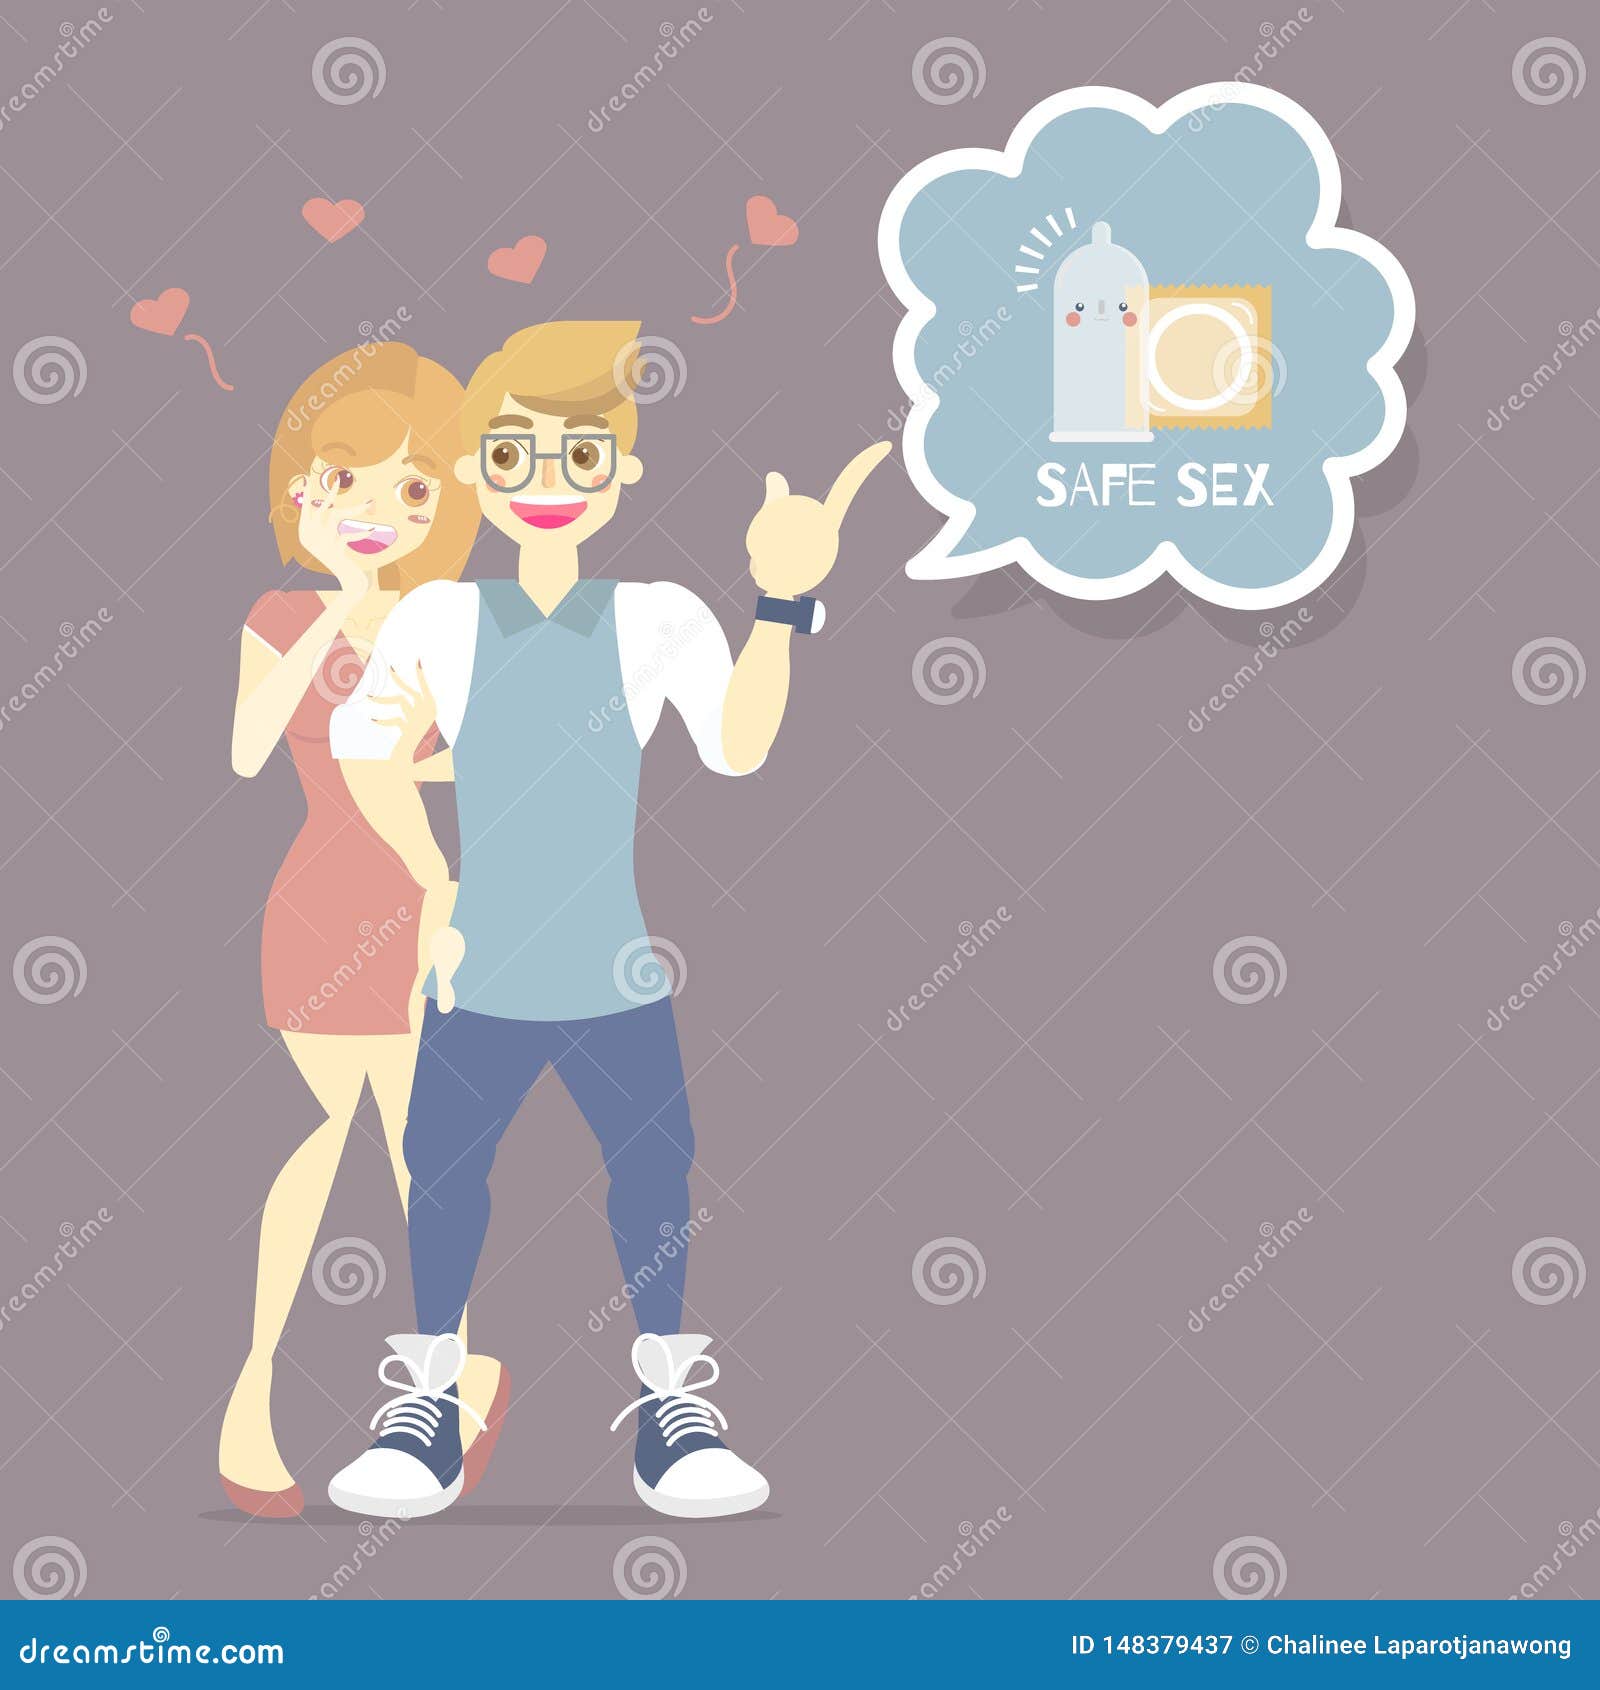 Couple Lover, Man and Woman with Condom, Prevention of Hiv, Aids, Sexually Transmitted Diseases, Safe Sex Concept Stock Vector